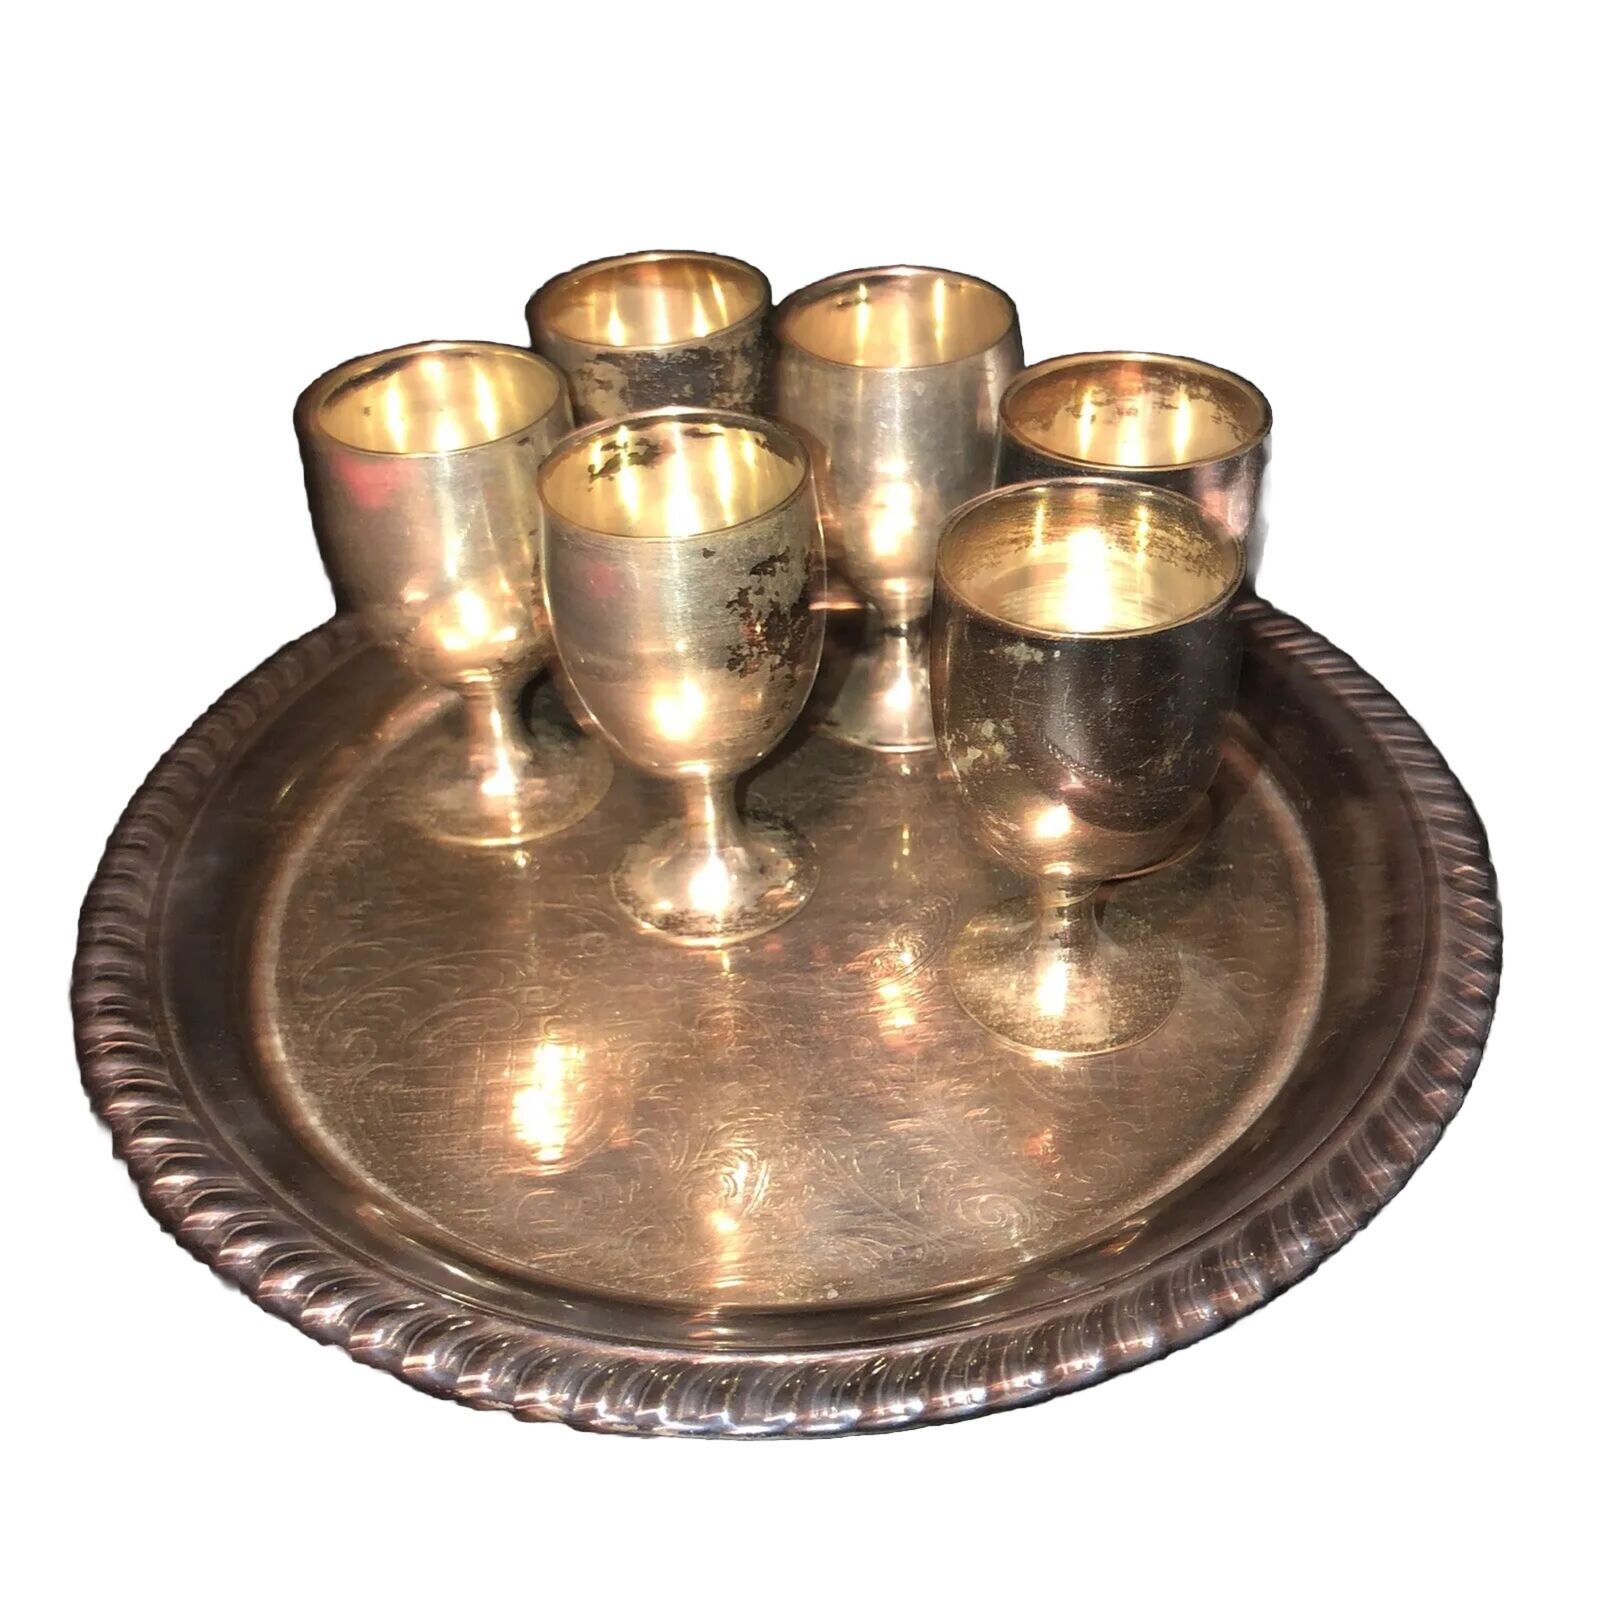 6 Vintage Leonard Silver Plate Shot Glasses / Small Sherry Goblets Tray Fun